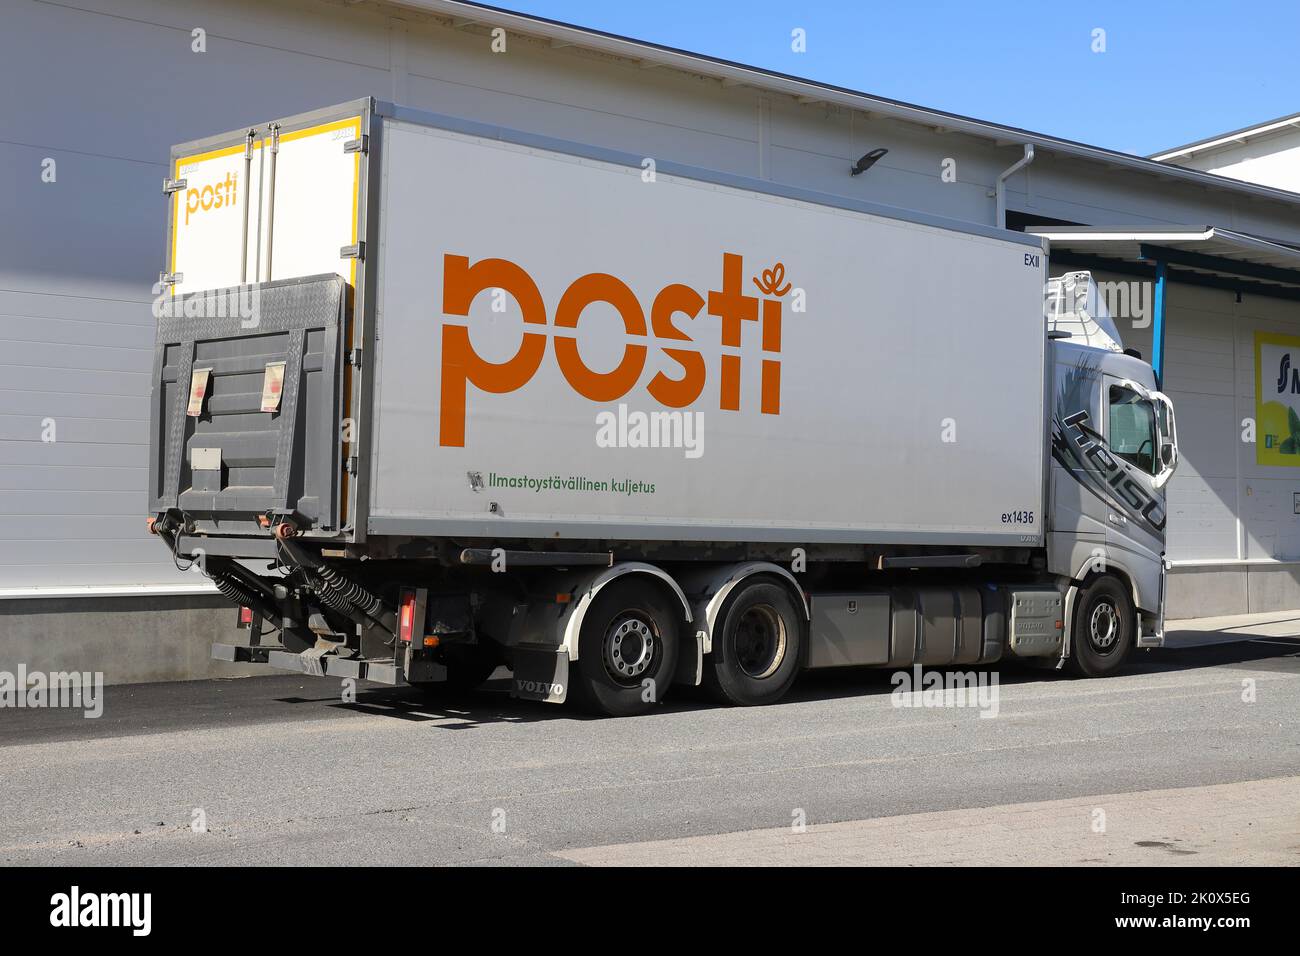 Ylitornio, Finland - August 29, 2022: The Finnish national postal service Posti parcel delivery truck outside the S Market super market. Stock Photo